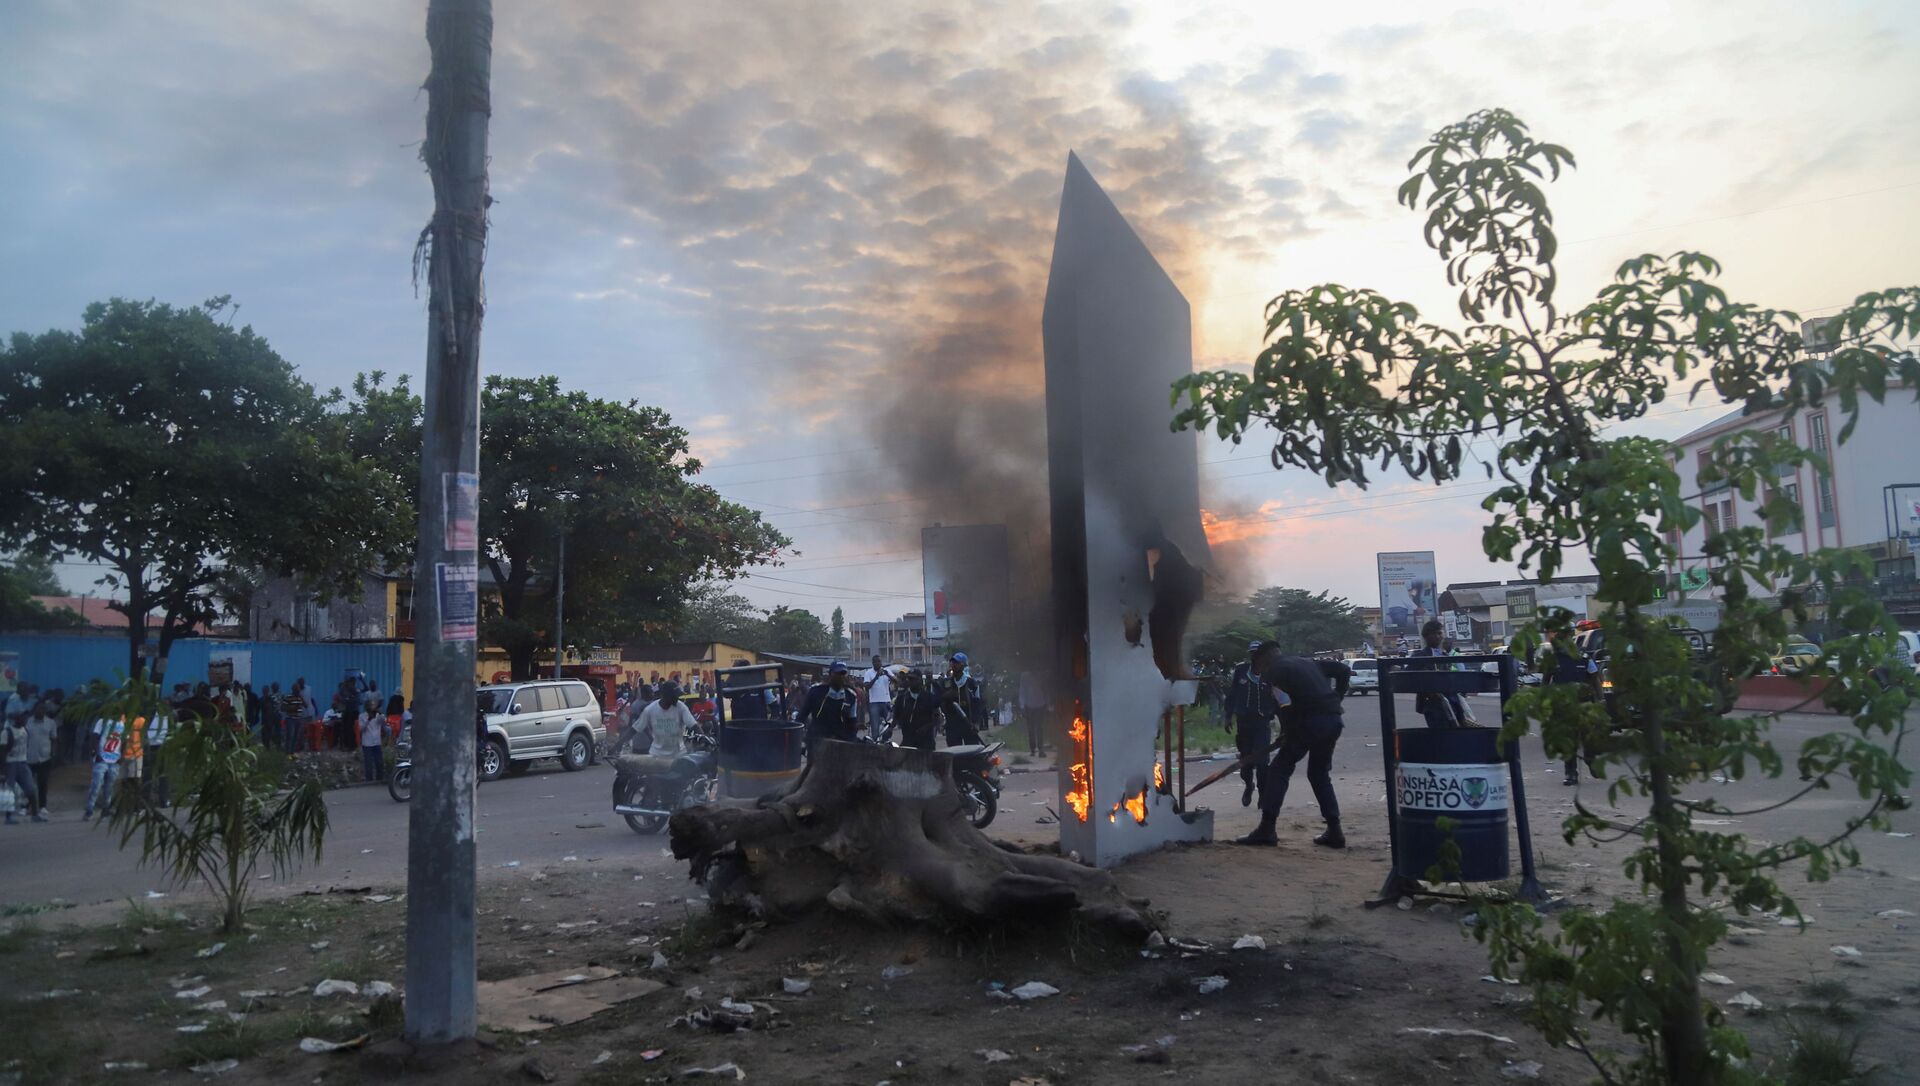 Residents set fire to mysterious monolith that appeared in Kinshasa, Democratic Republic of Congo February 17, 2021 - Sputnik International, 1920, 19.02.2021